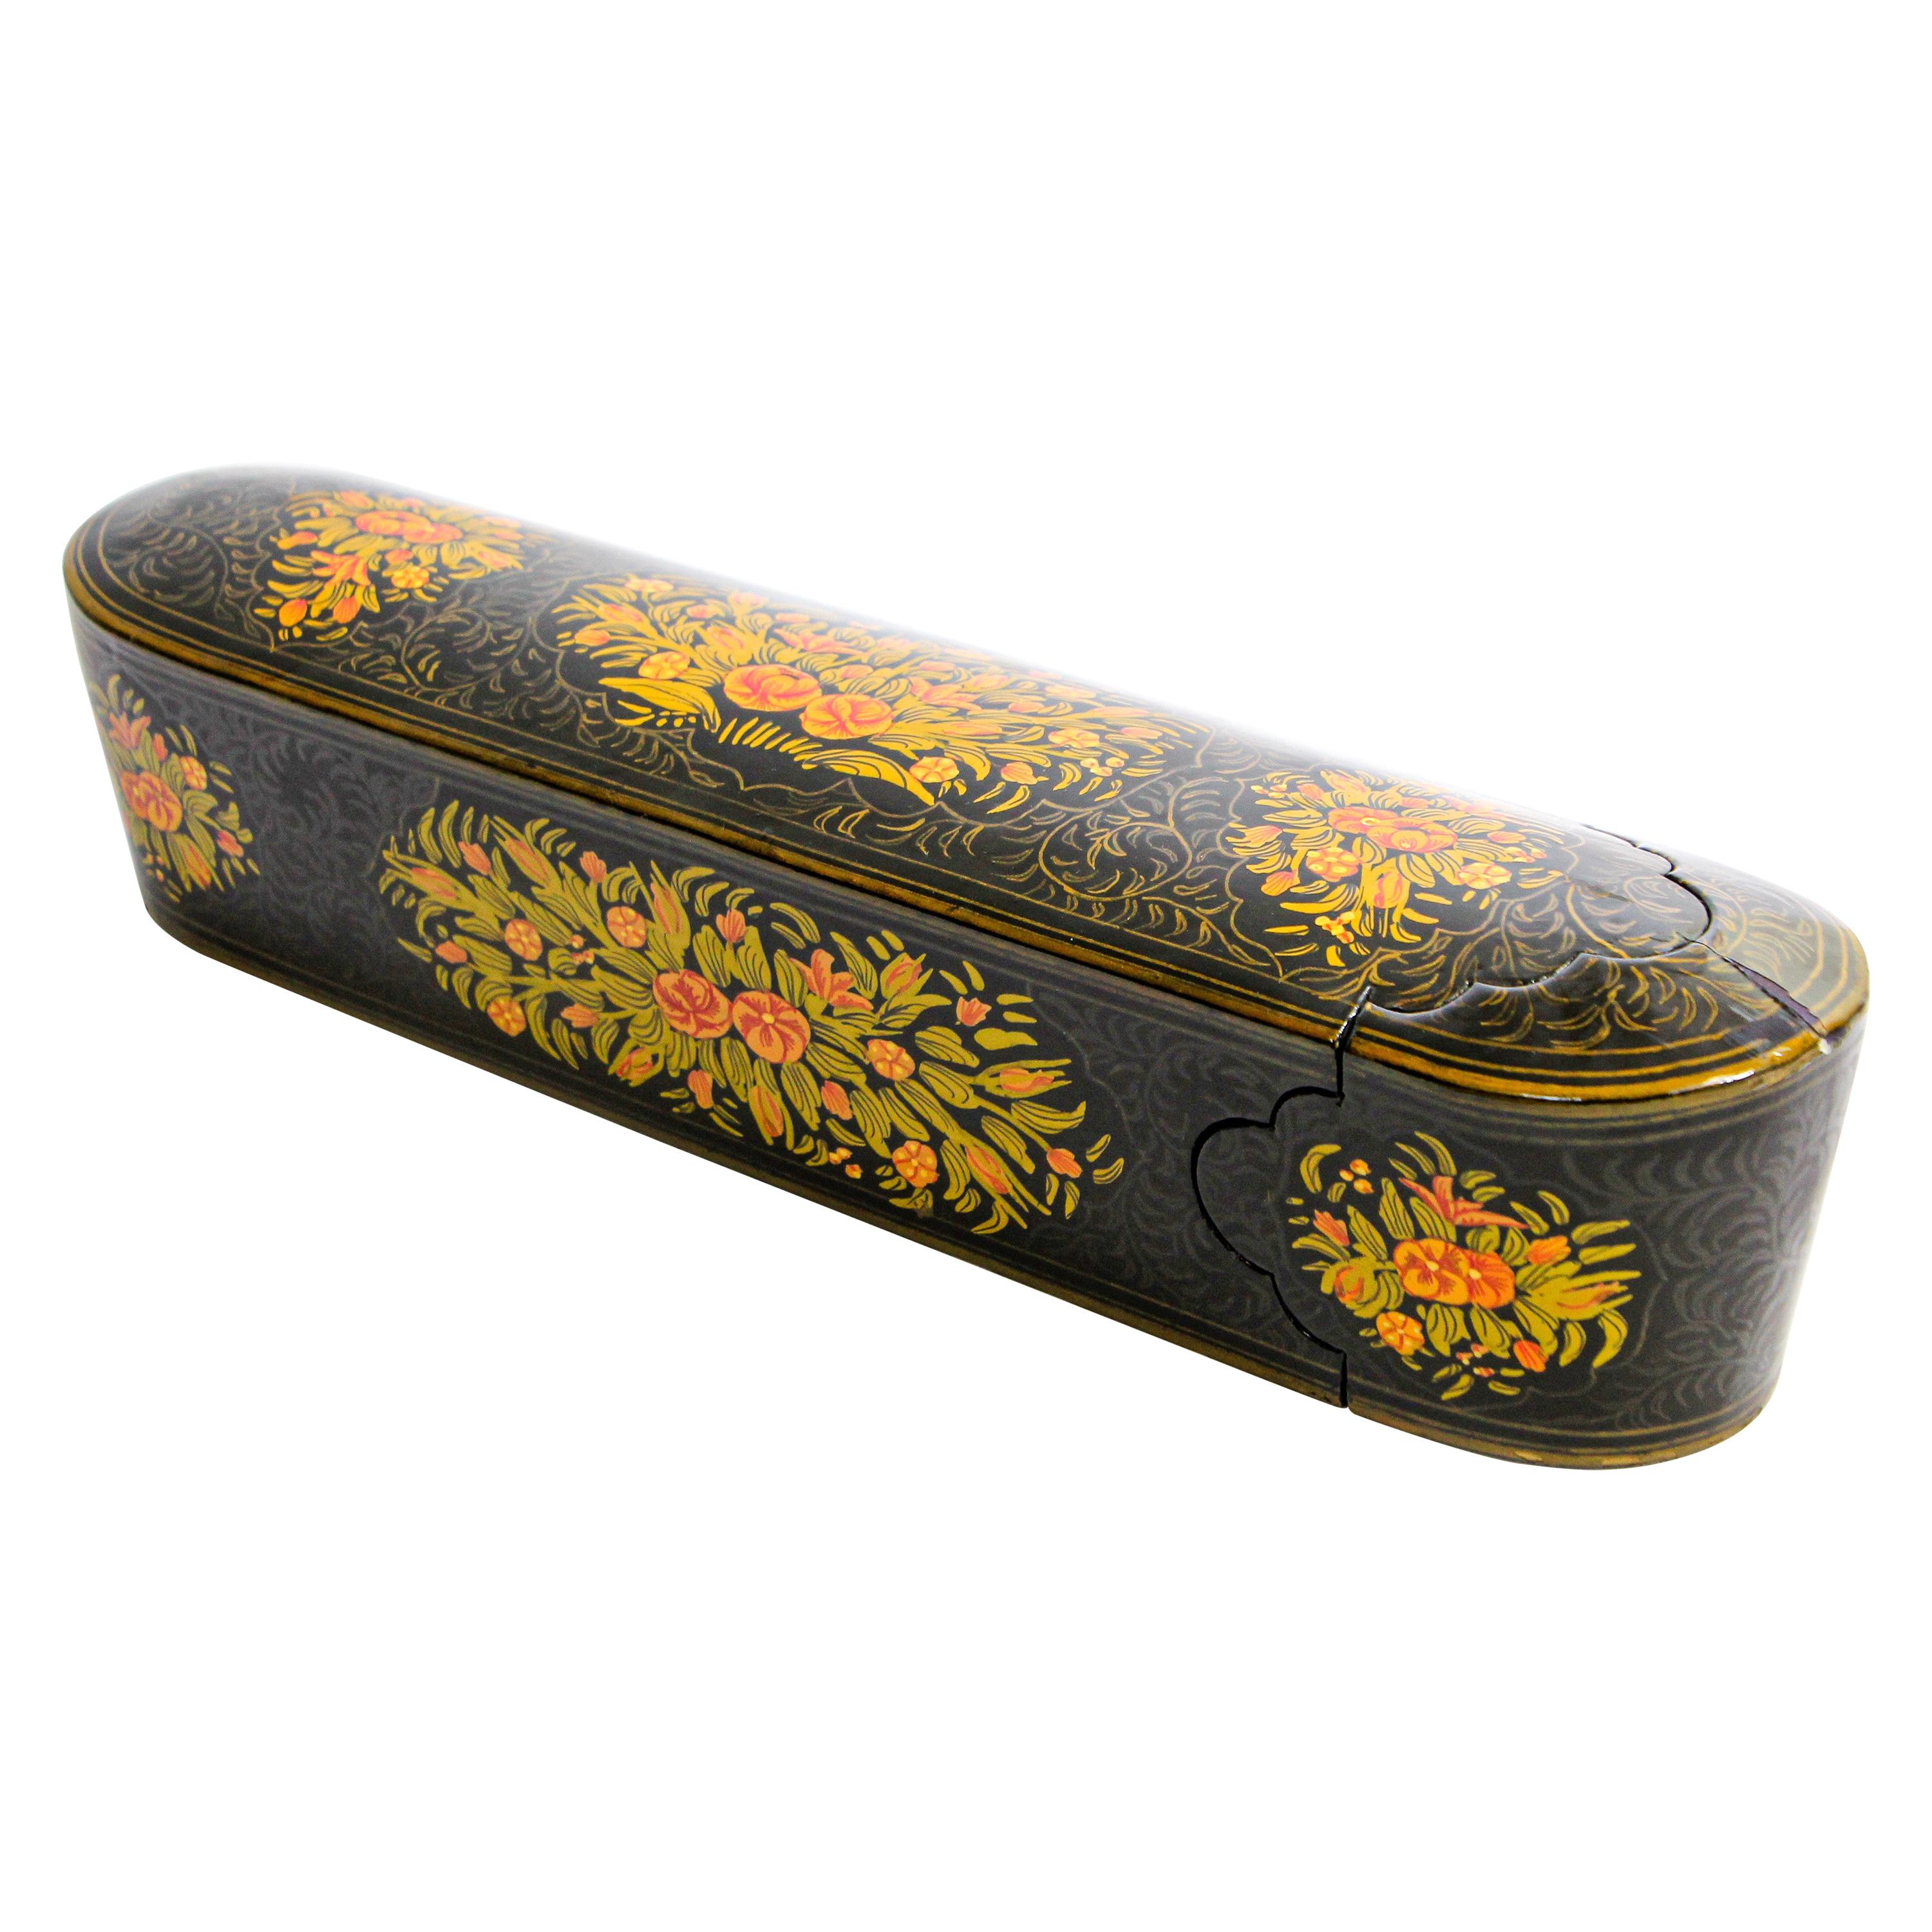 Indo Persian Lacquer Pen Box Hand Painted with Floral Design